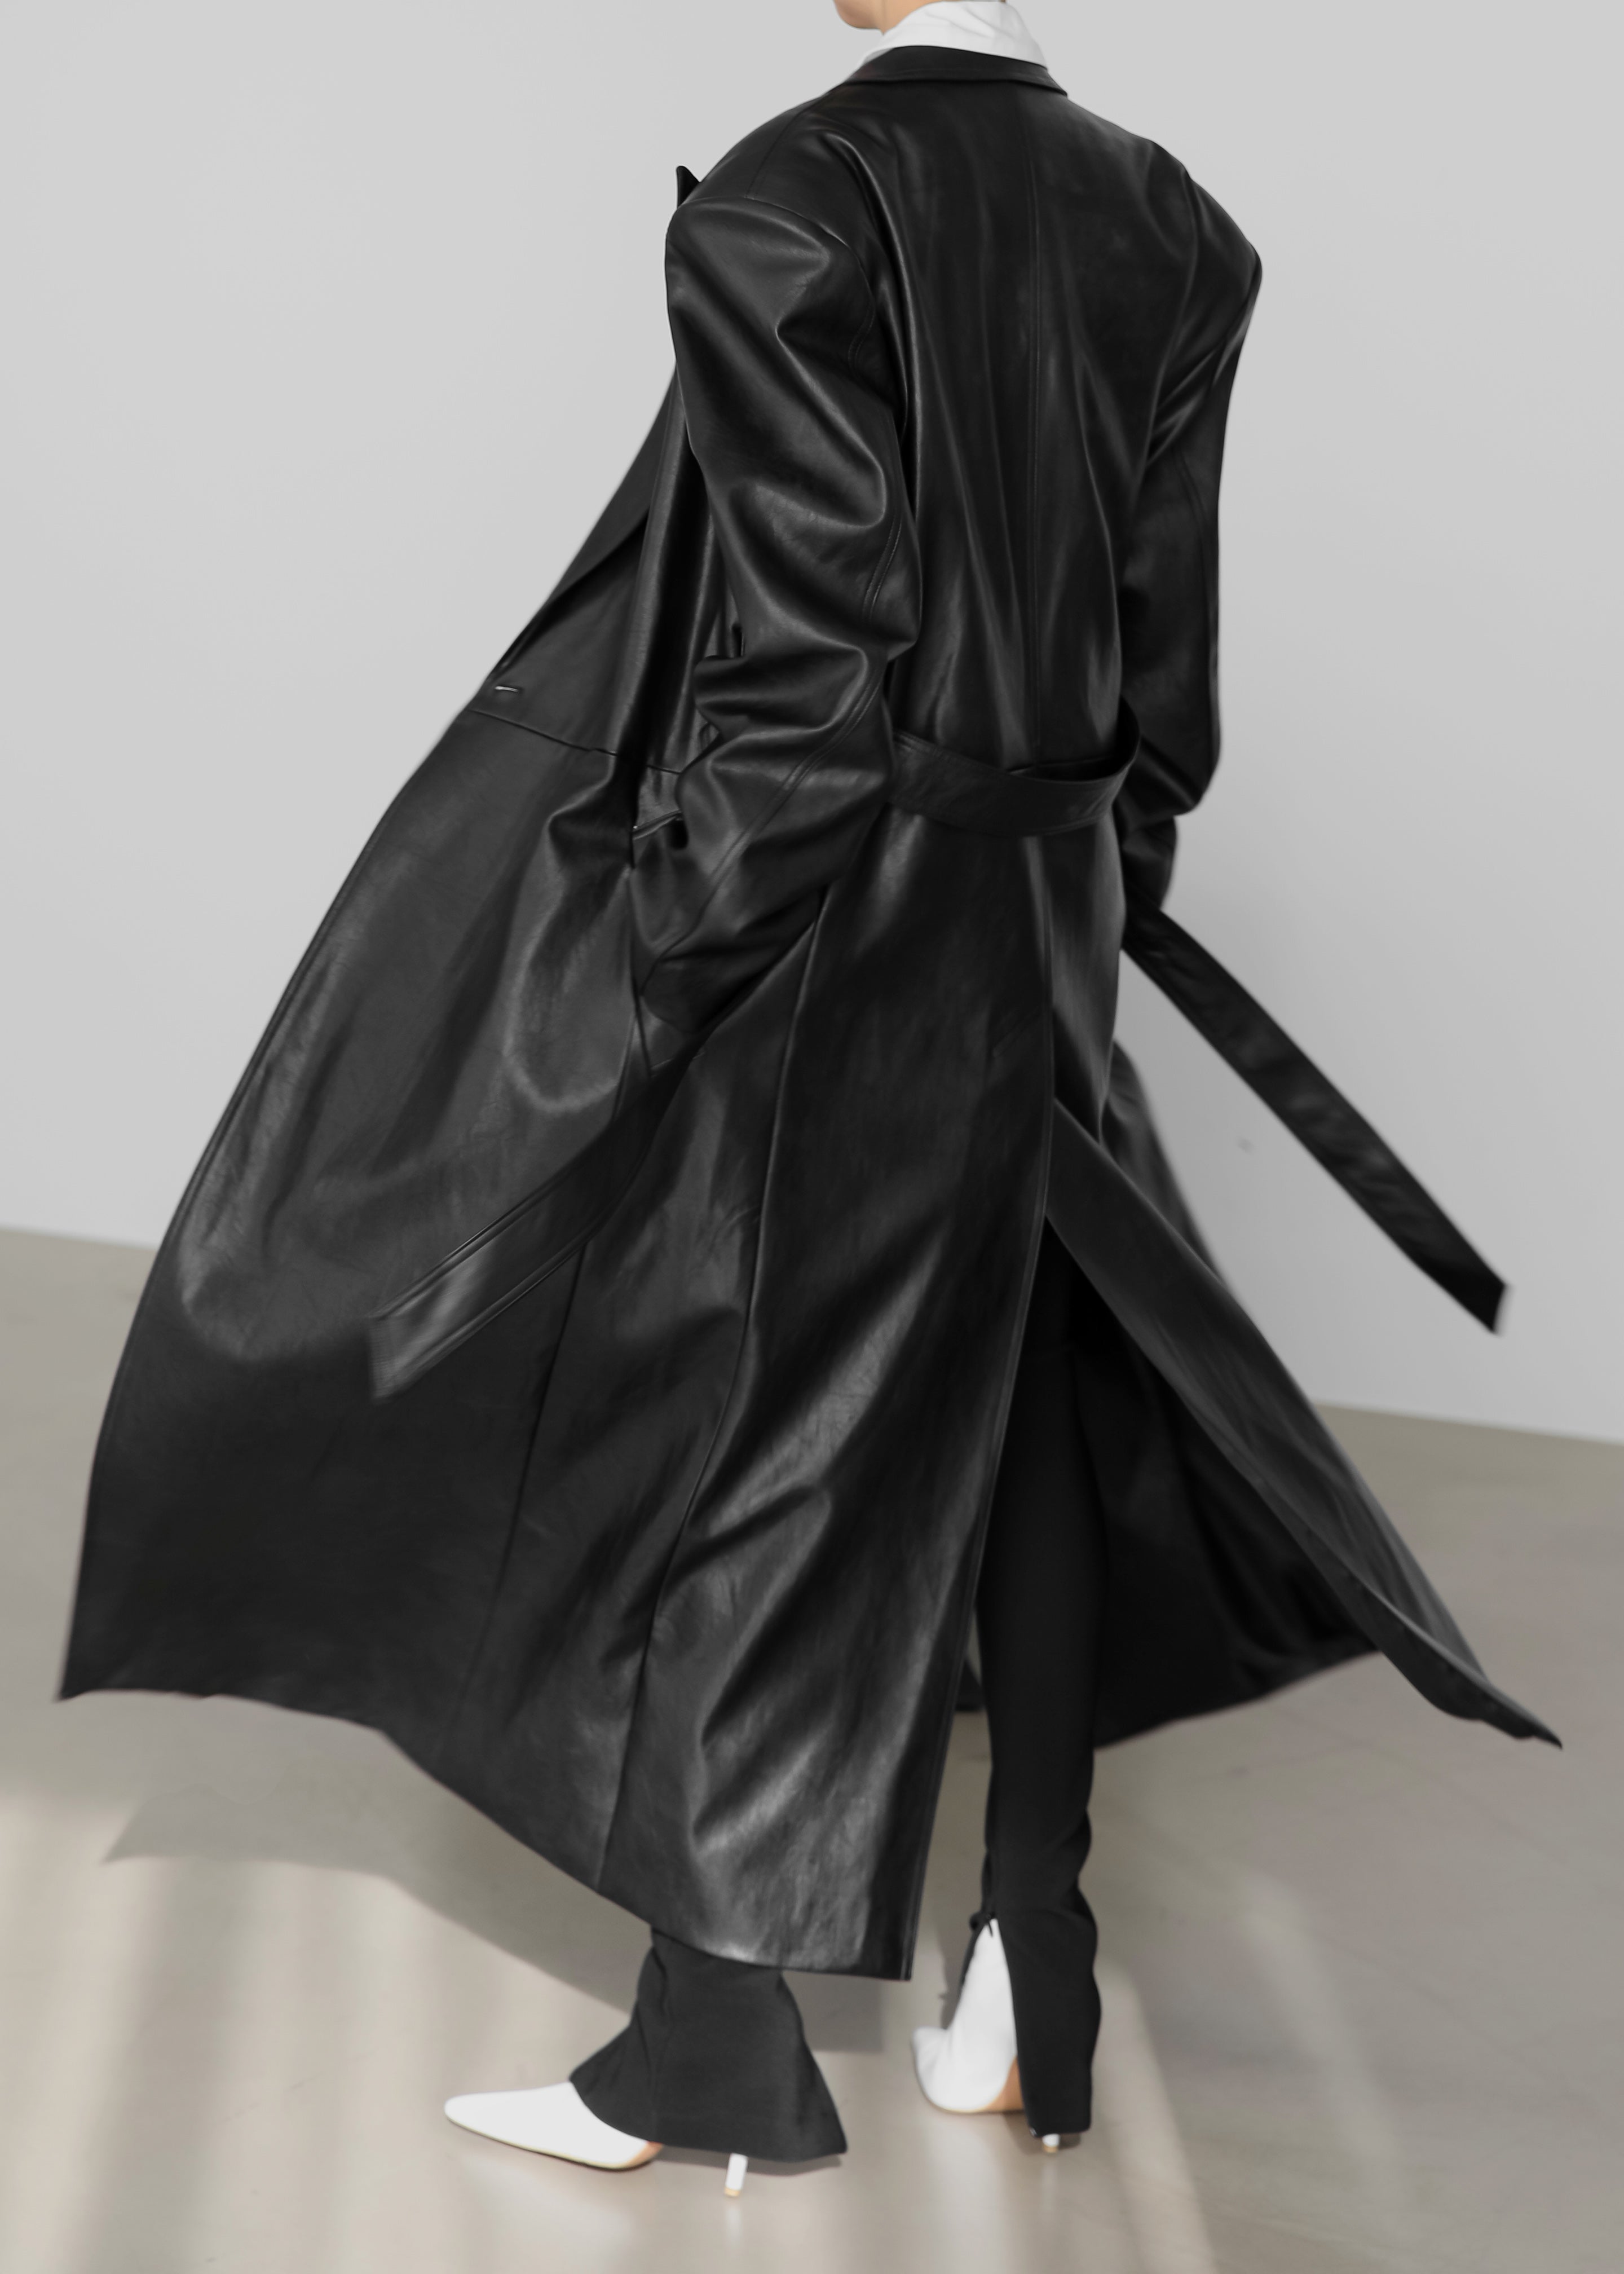 Zara - Belted Faux Leather Trench - Black - Women